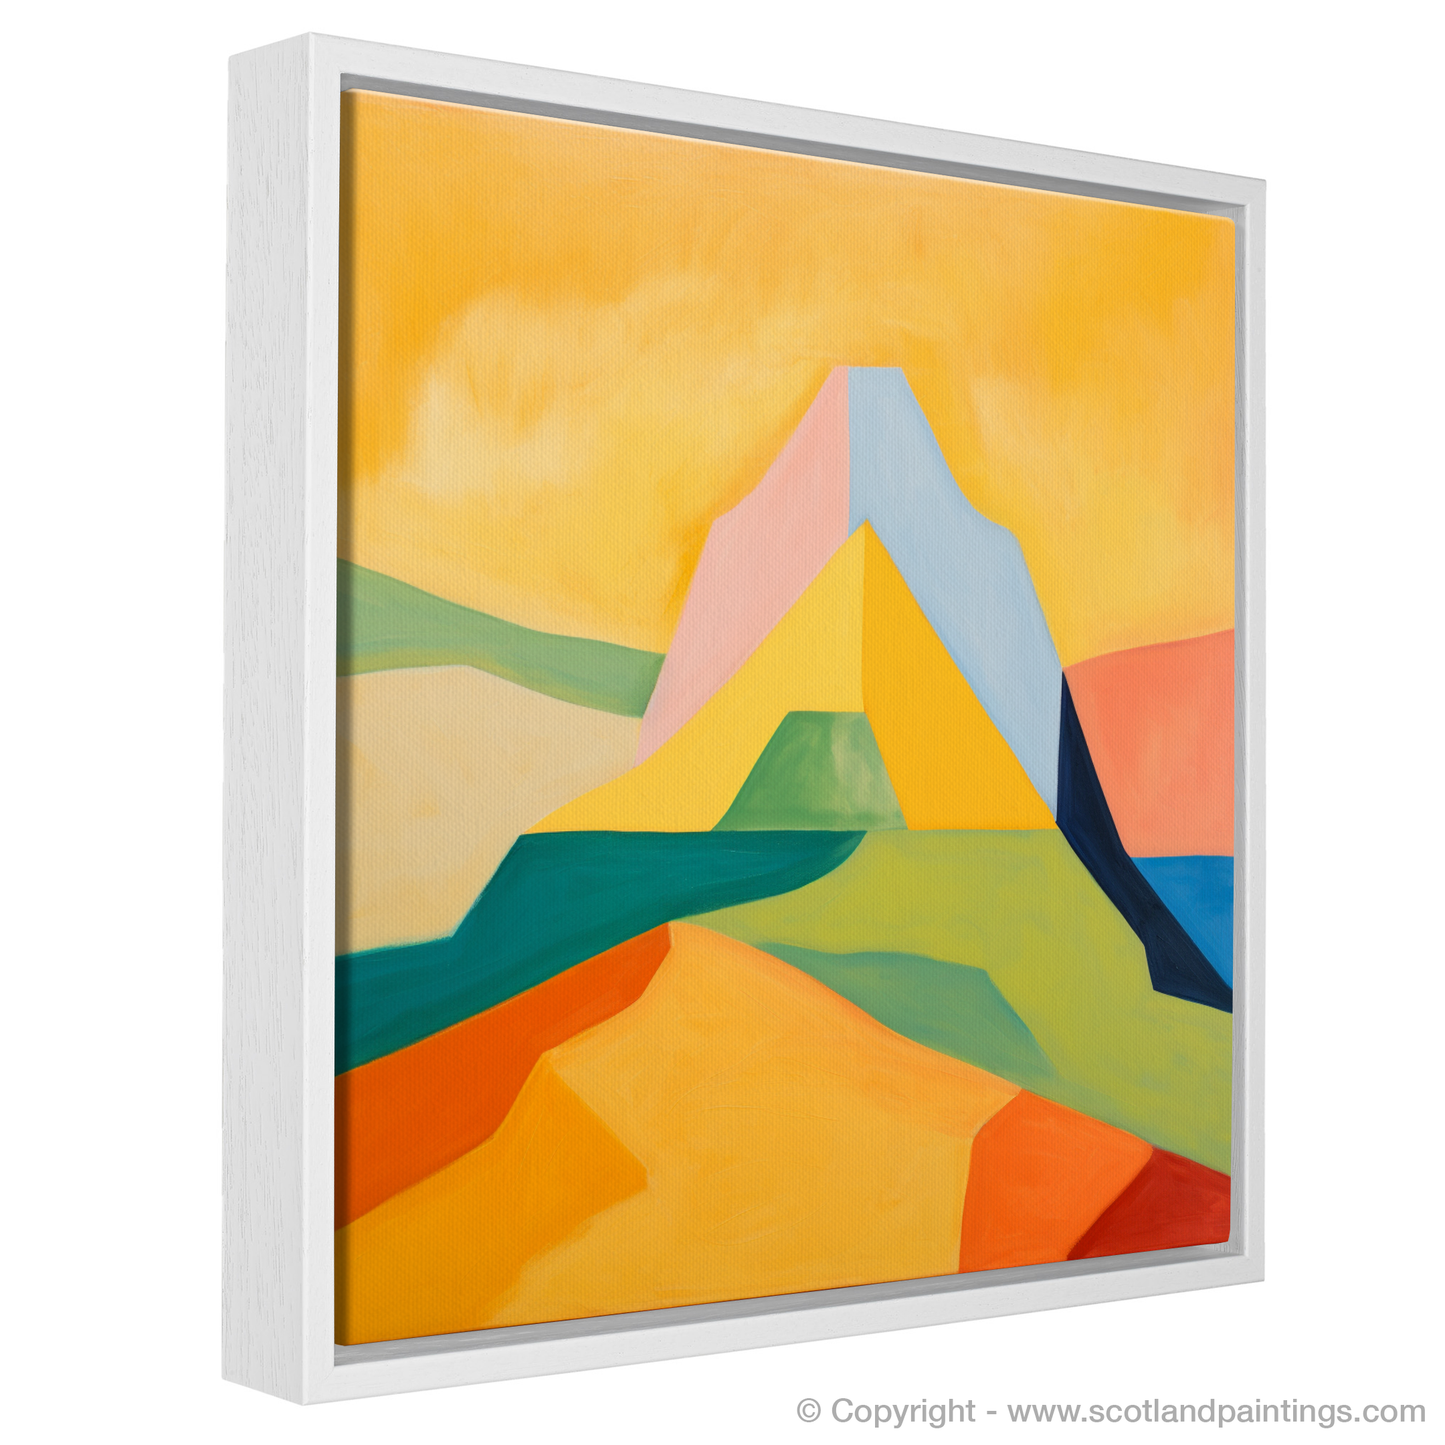 Painting and Art Print of Mount Keen entitled "Abstract Dawn over Mount Keen".